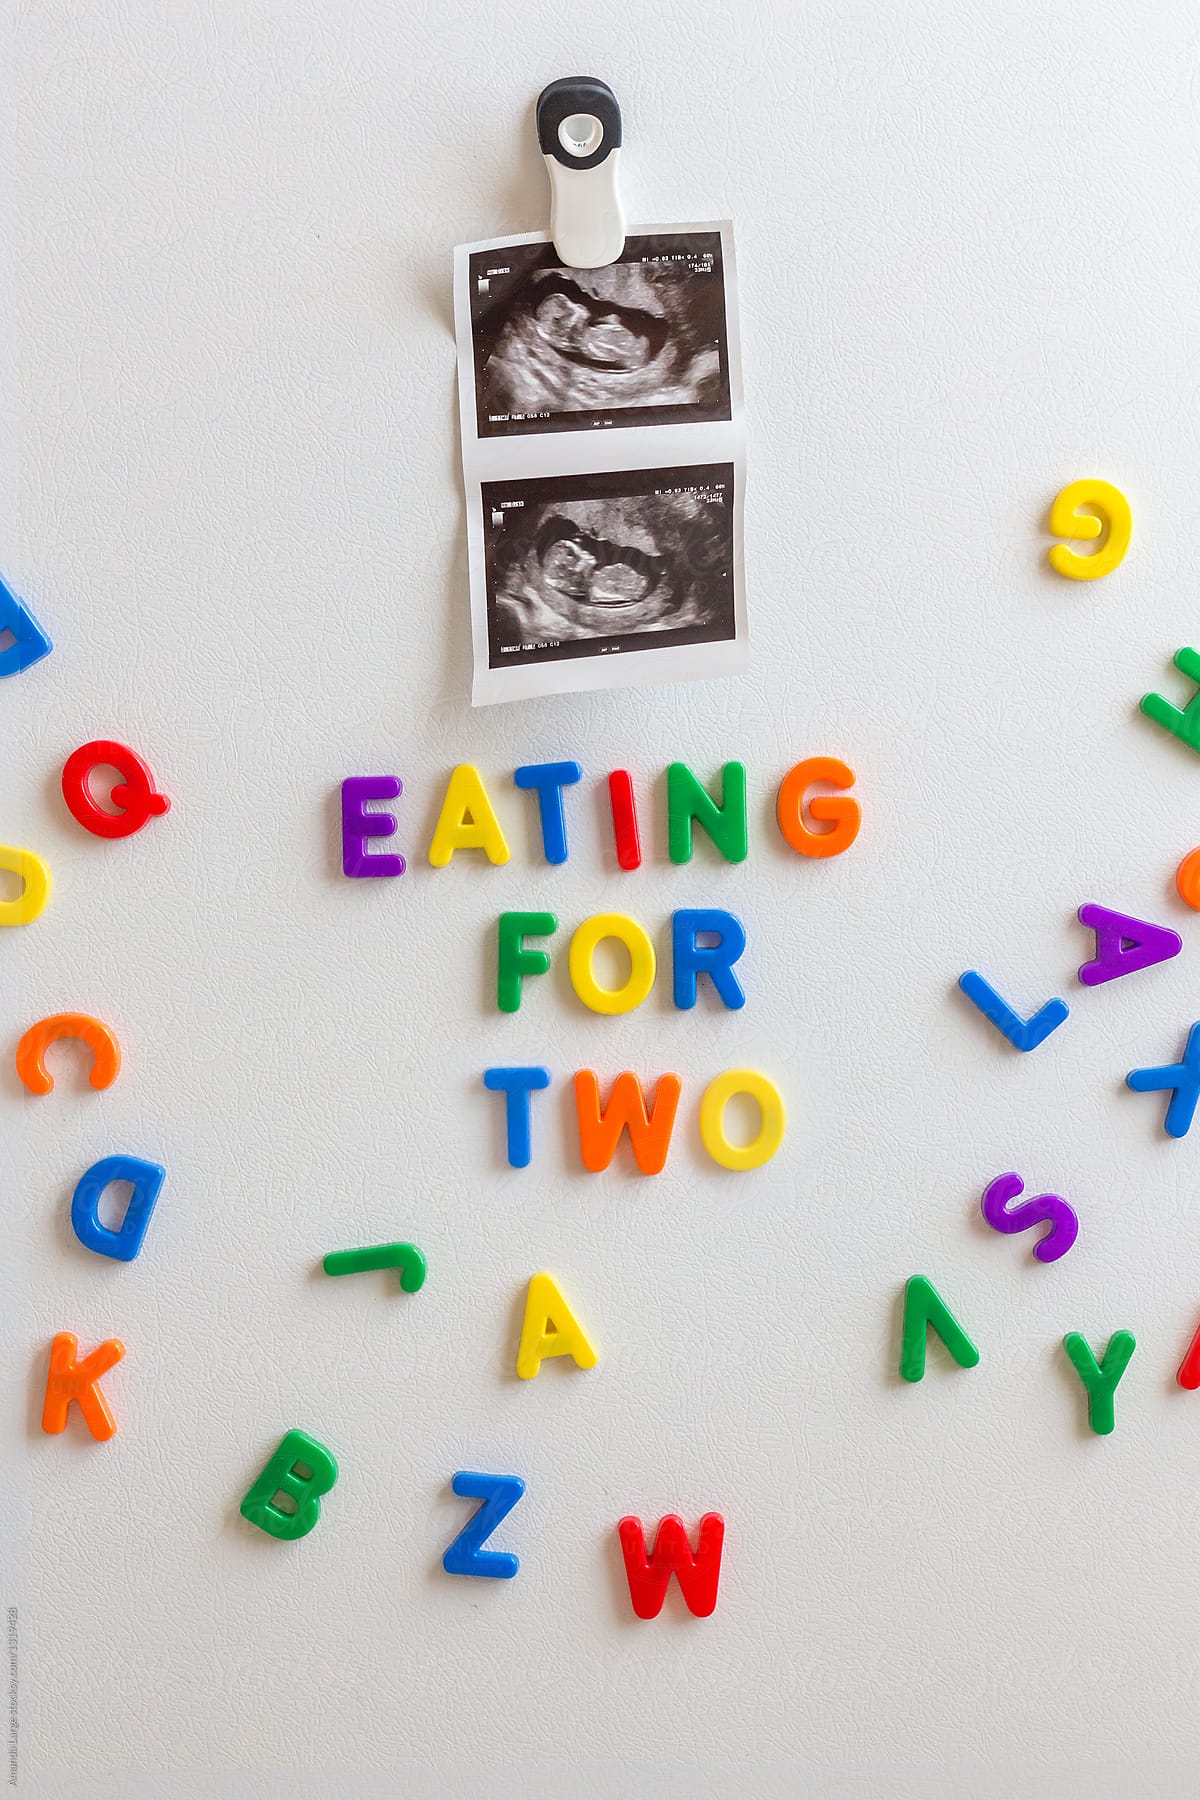 Fetal ultrasound image and magnetic letters on a fridge